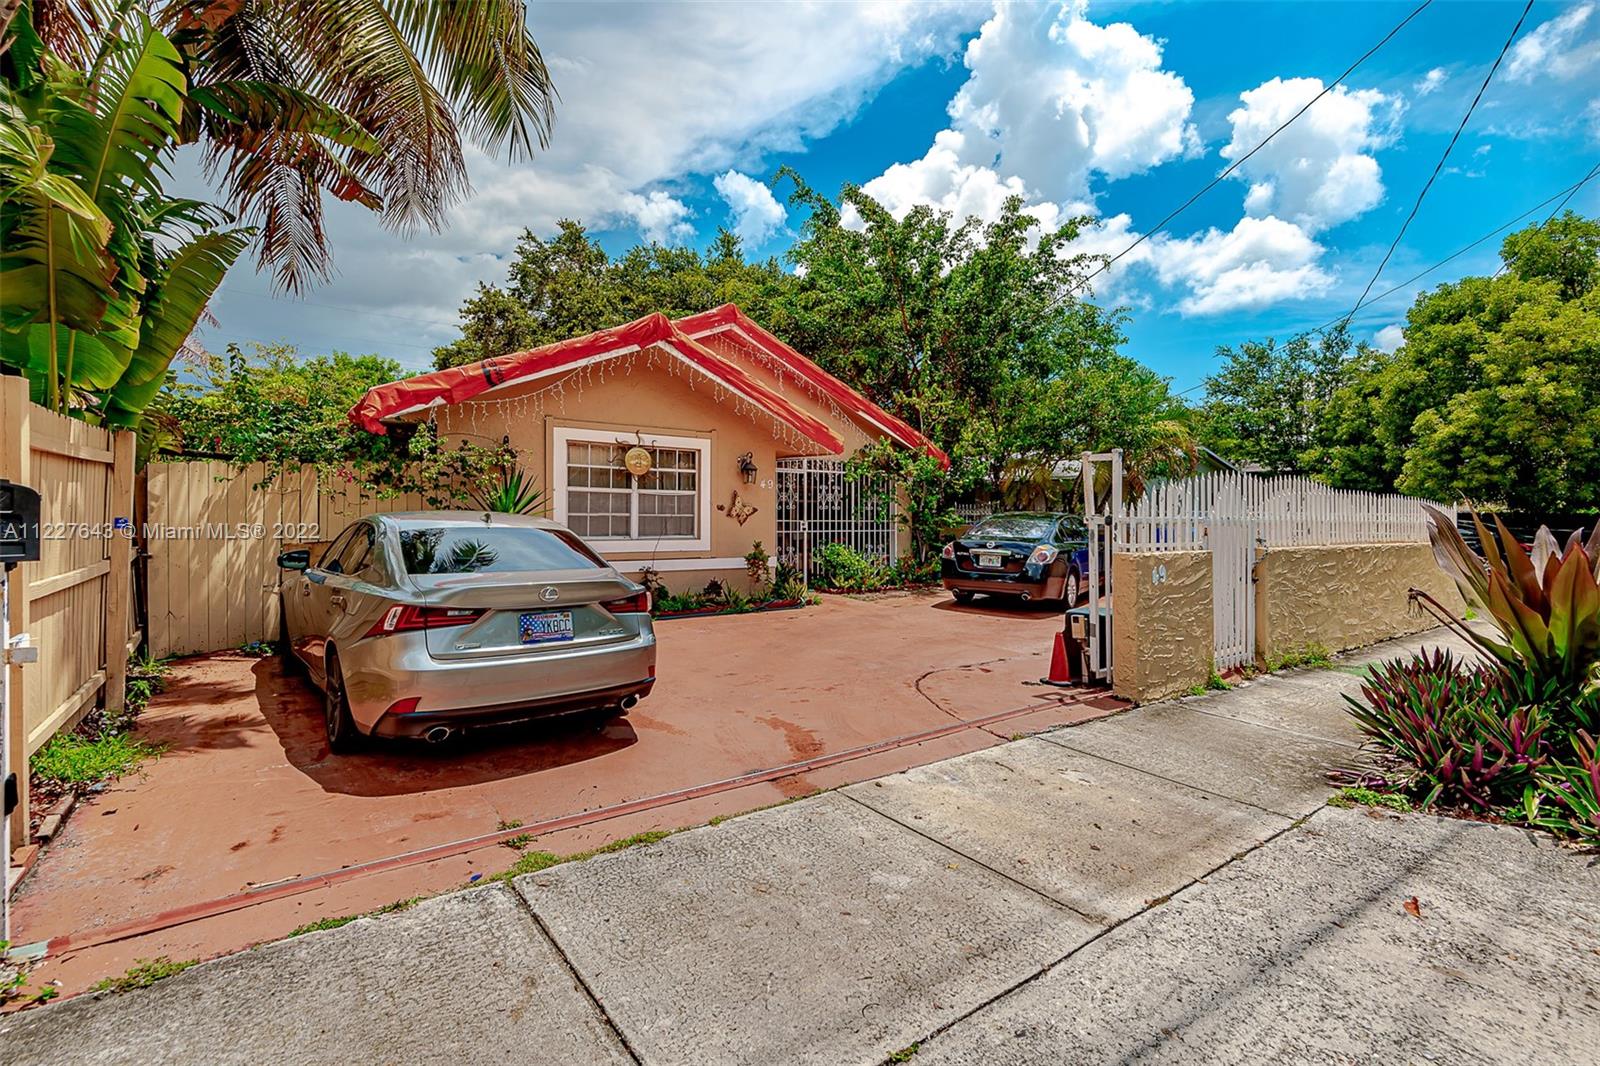 Property for Sale at 49 Nw 35th St St, Miami, Broward County, Florida - Bedrooms: 3 
Bathrooms: 2  - $2,100,000